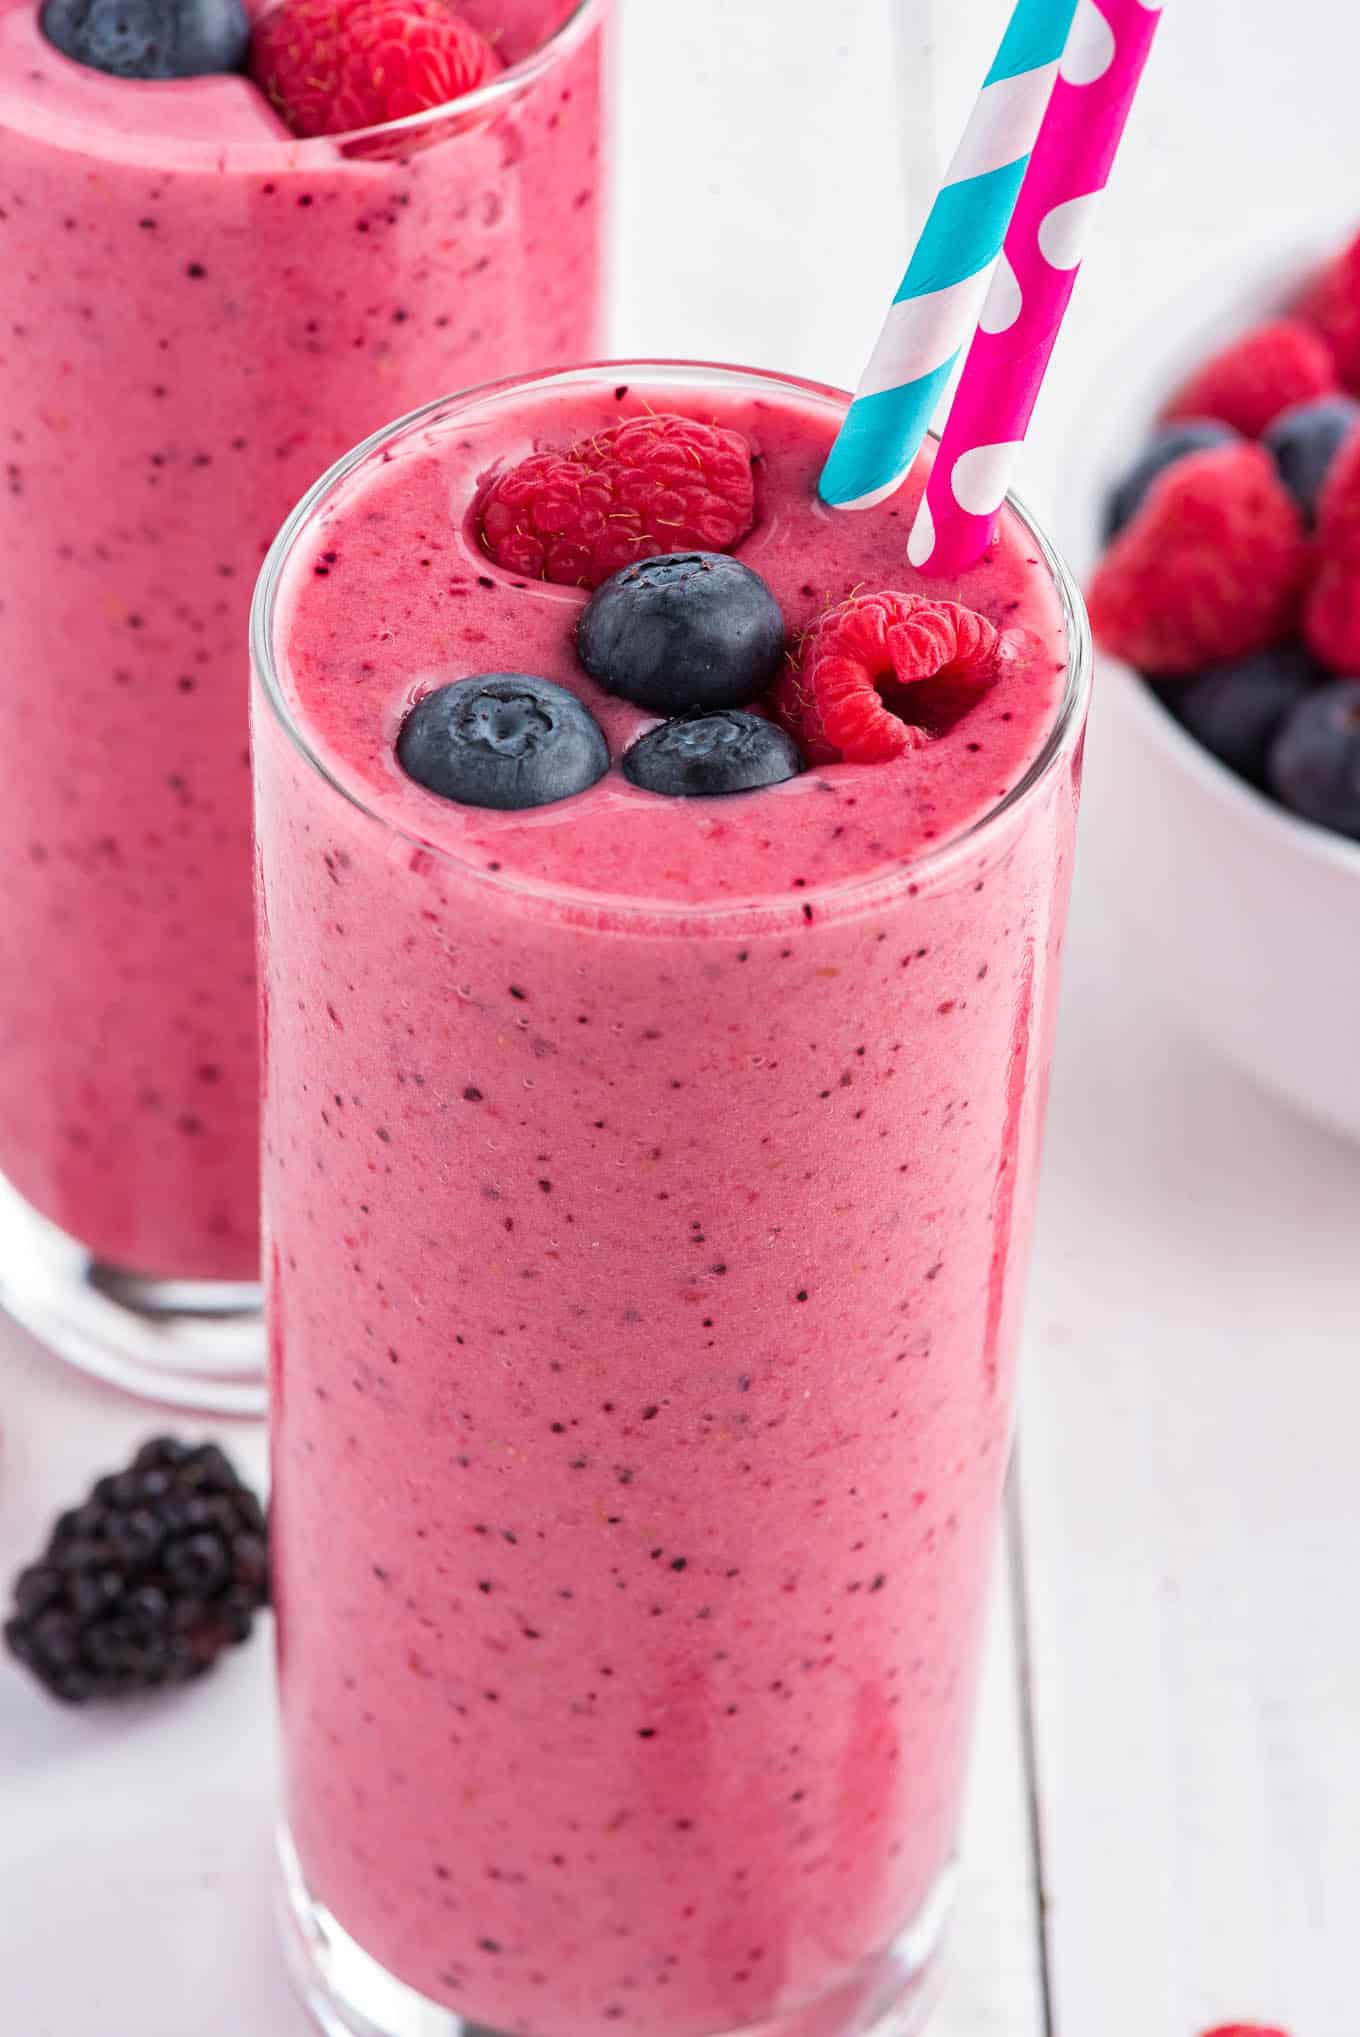 Boost Your Morning Routine with These Energizing Breakfast Smoothie Recipes